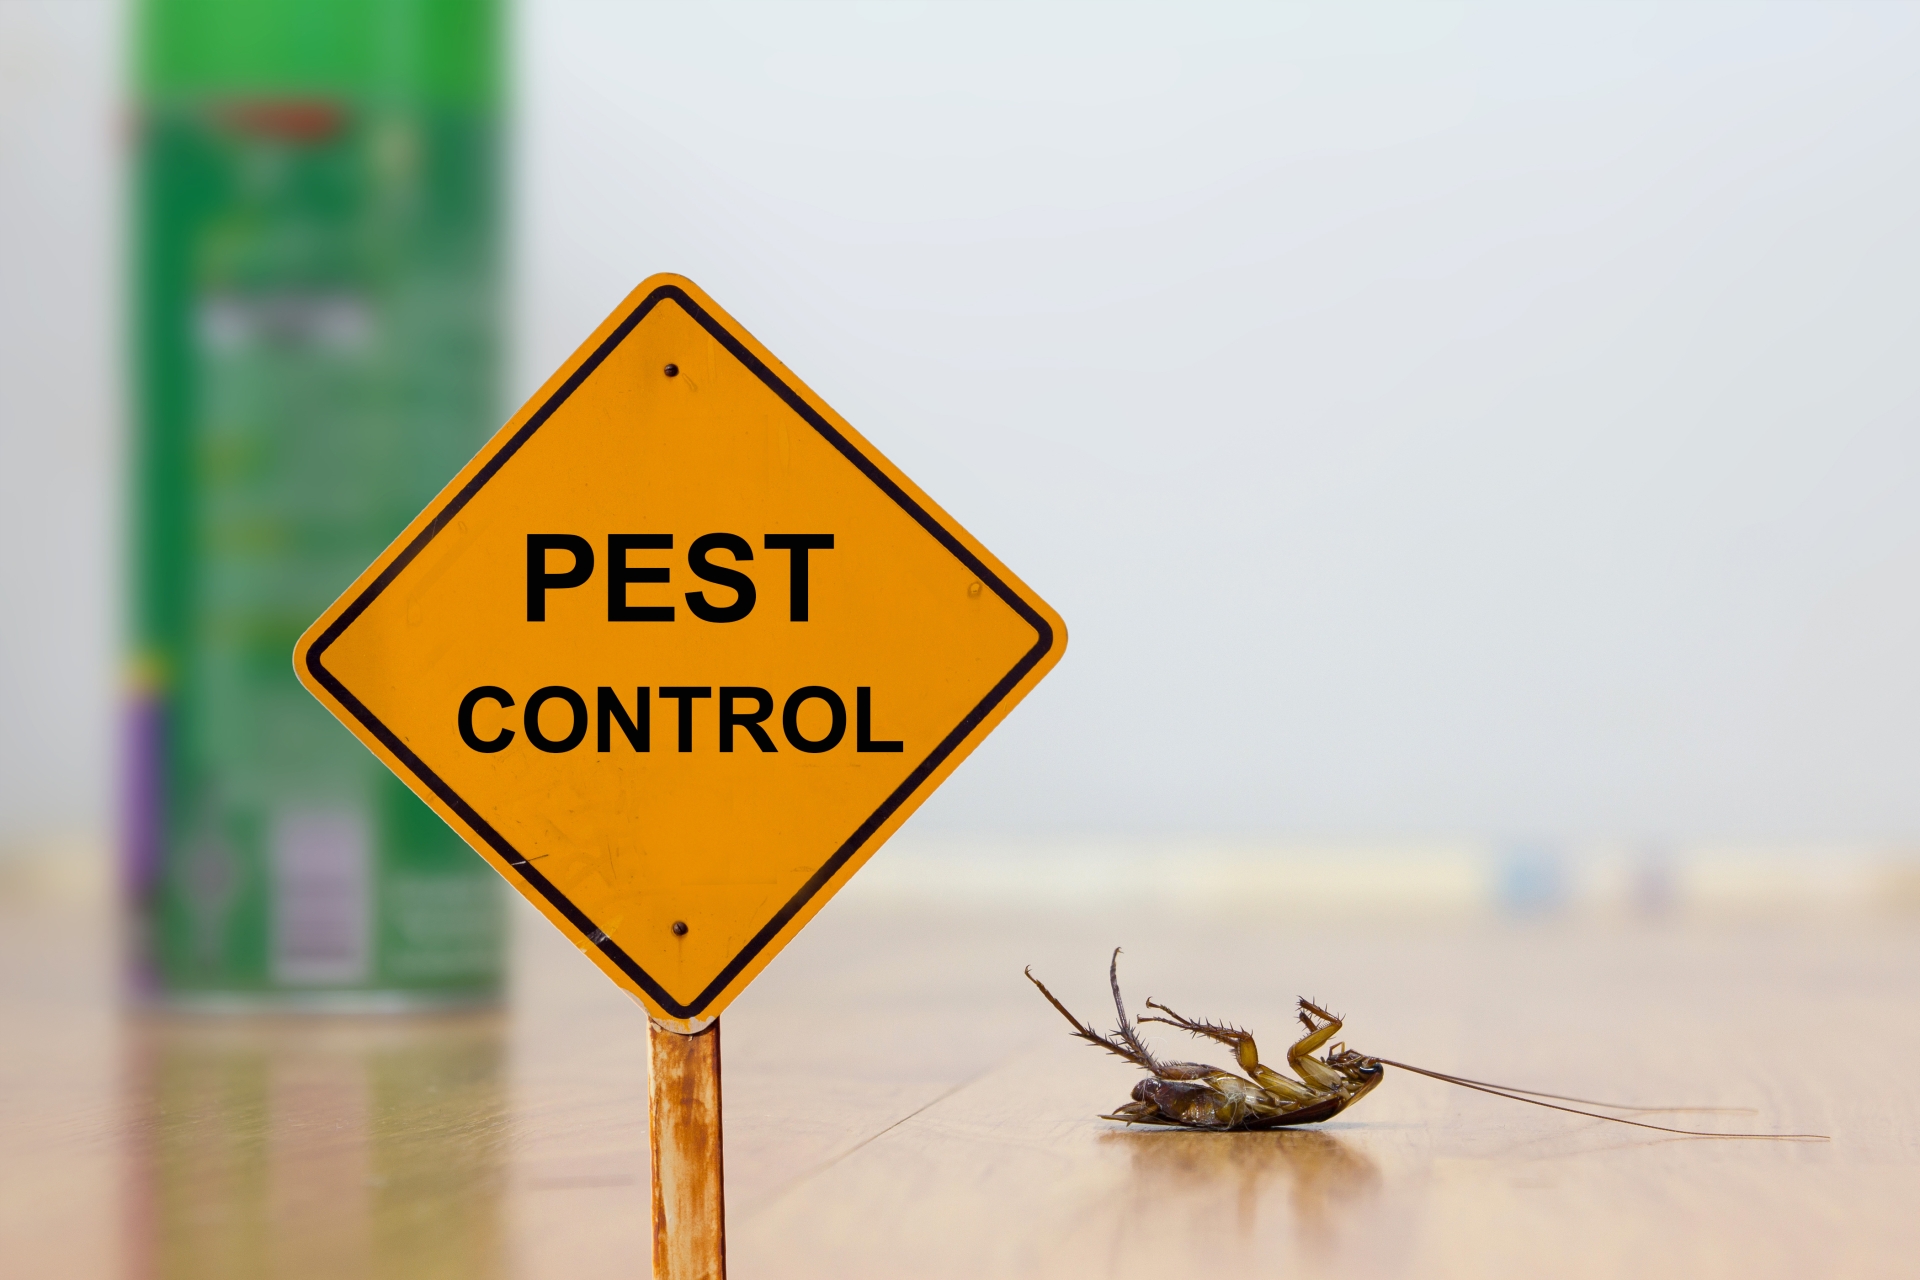 24 Hour Pest Control, Pest Control in Herne Hill, SE24. Call Now 020 8166 9746